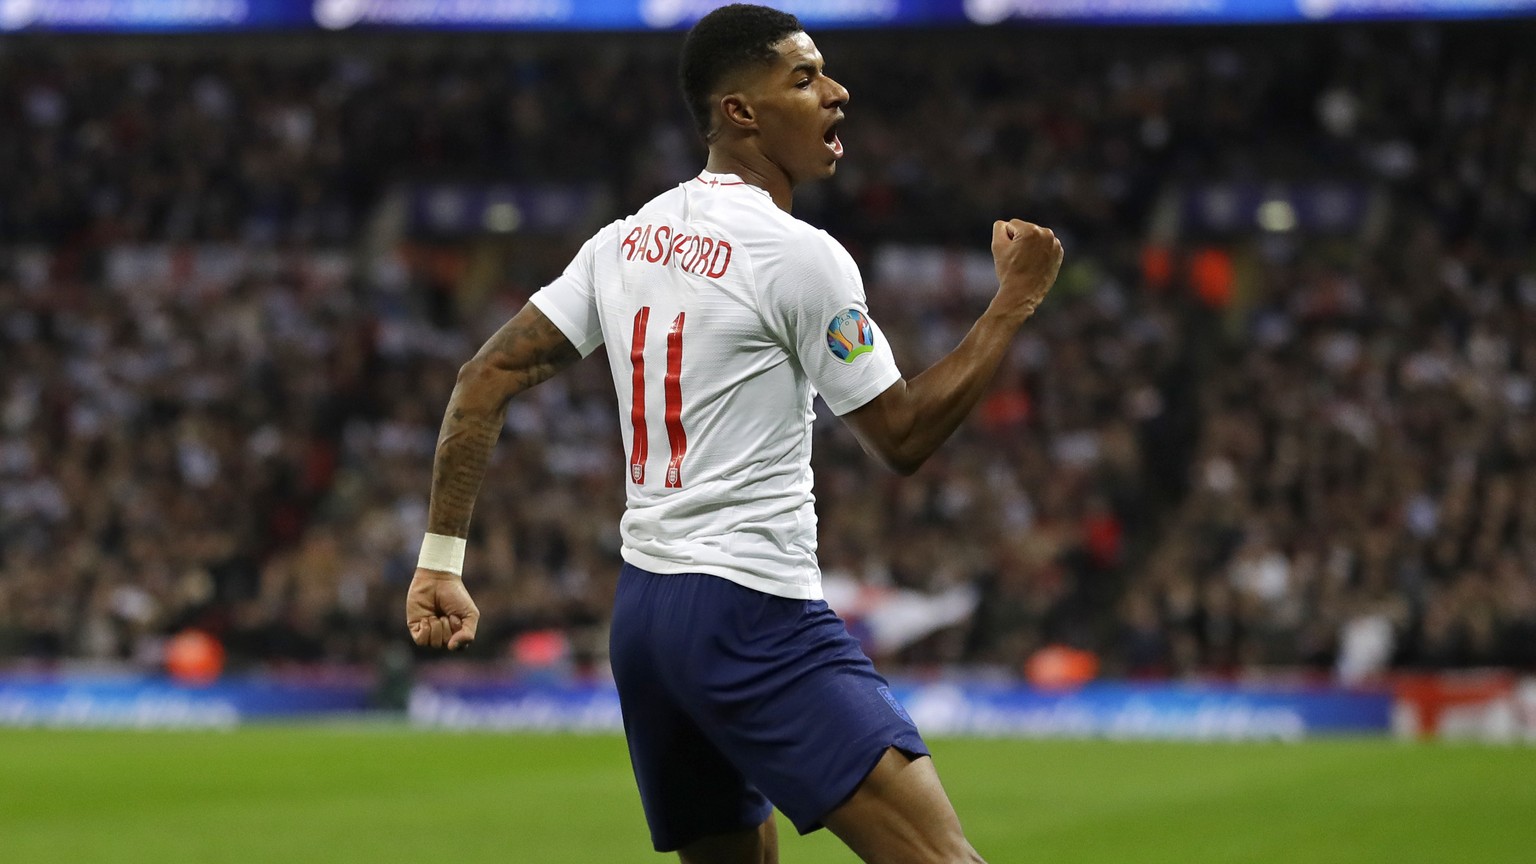 England&#039;s Marcus Rashford celebrates scoring his side&#039;s fourth goal during the Euro 2020 group A qualifying soccer match between England and Montenegro at Wembley stadium in London, Thursday ...